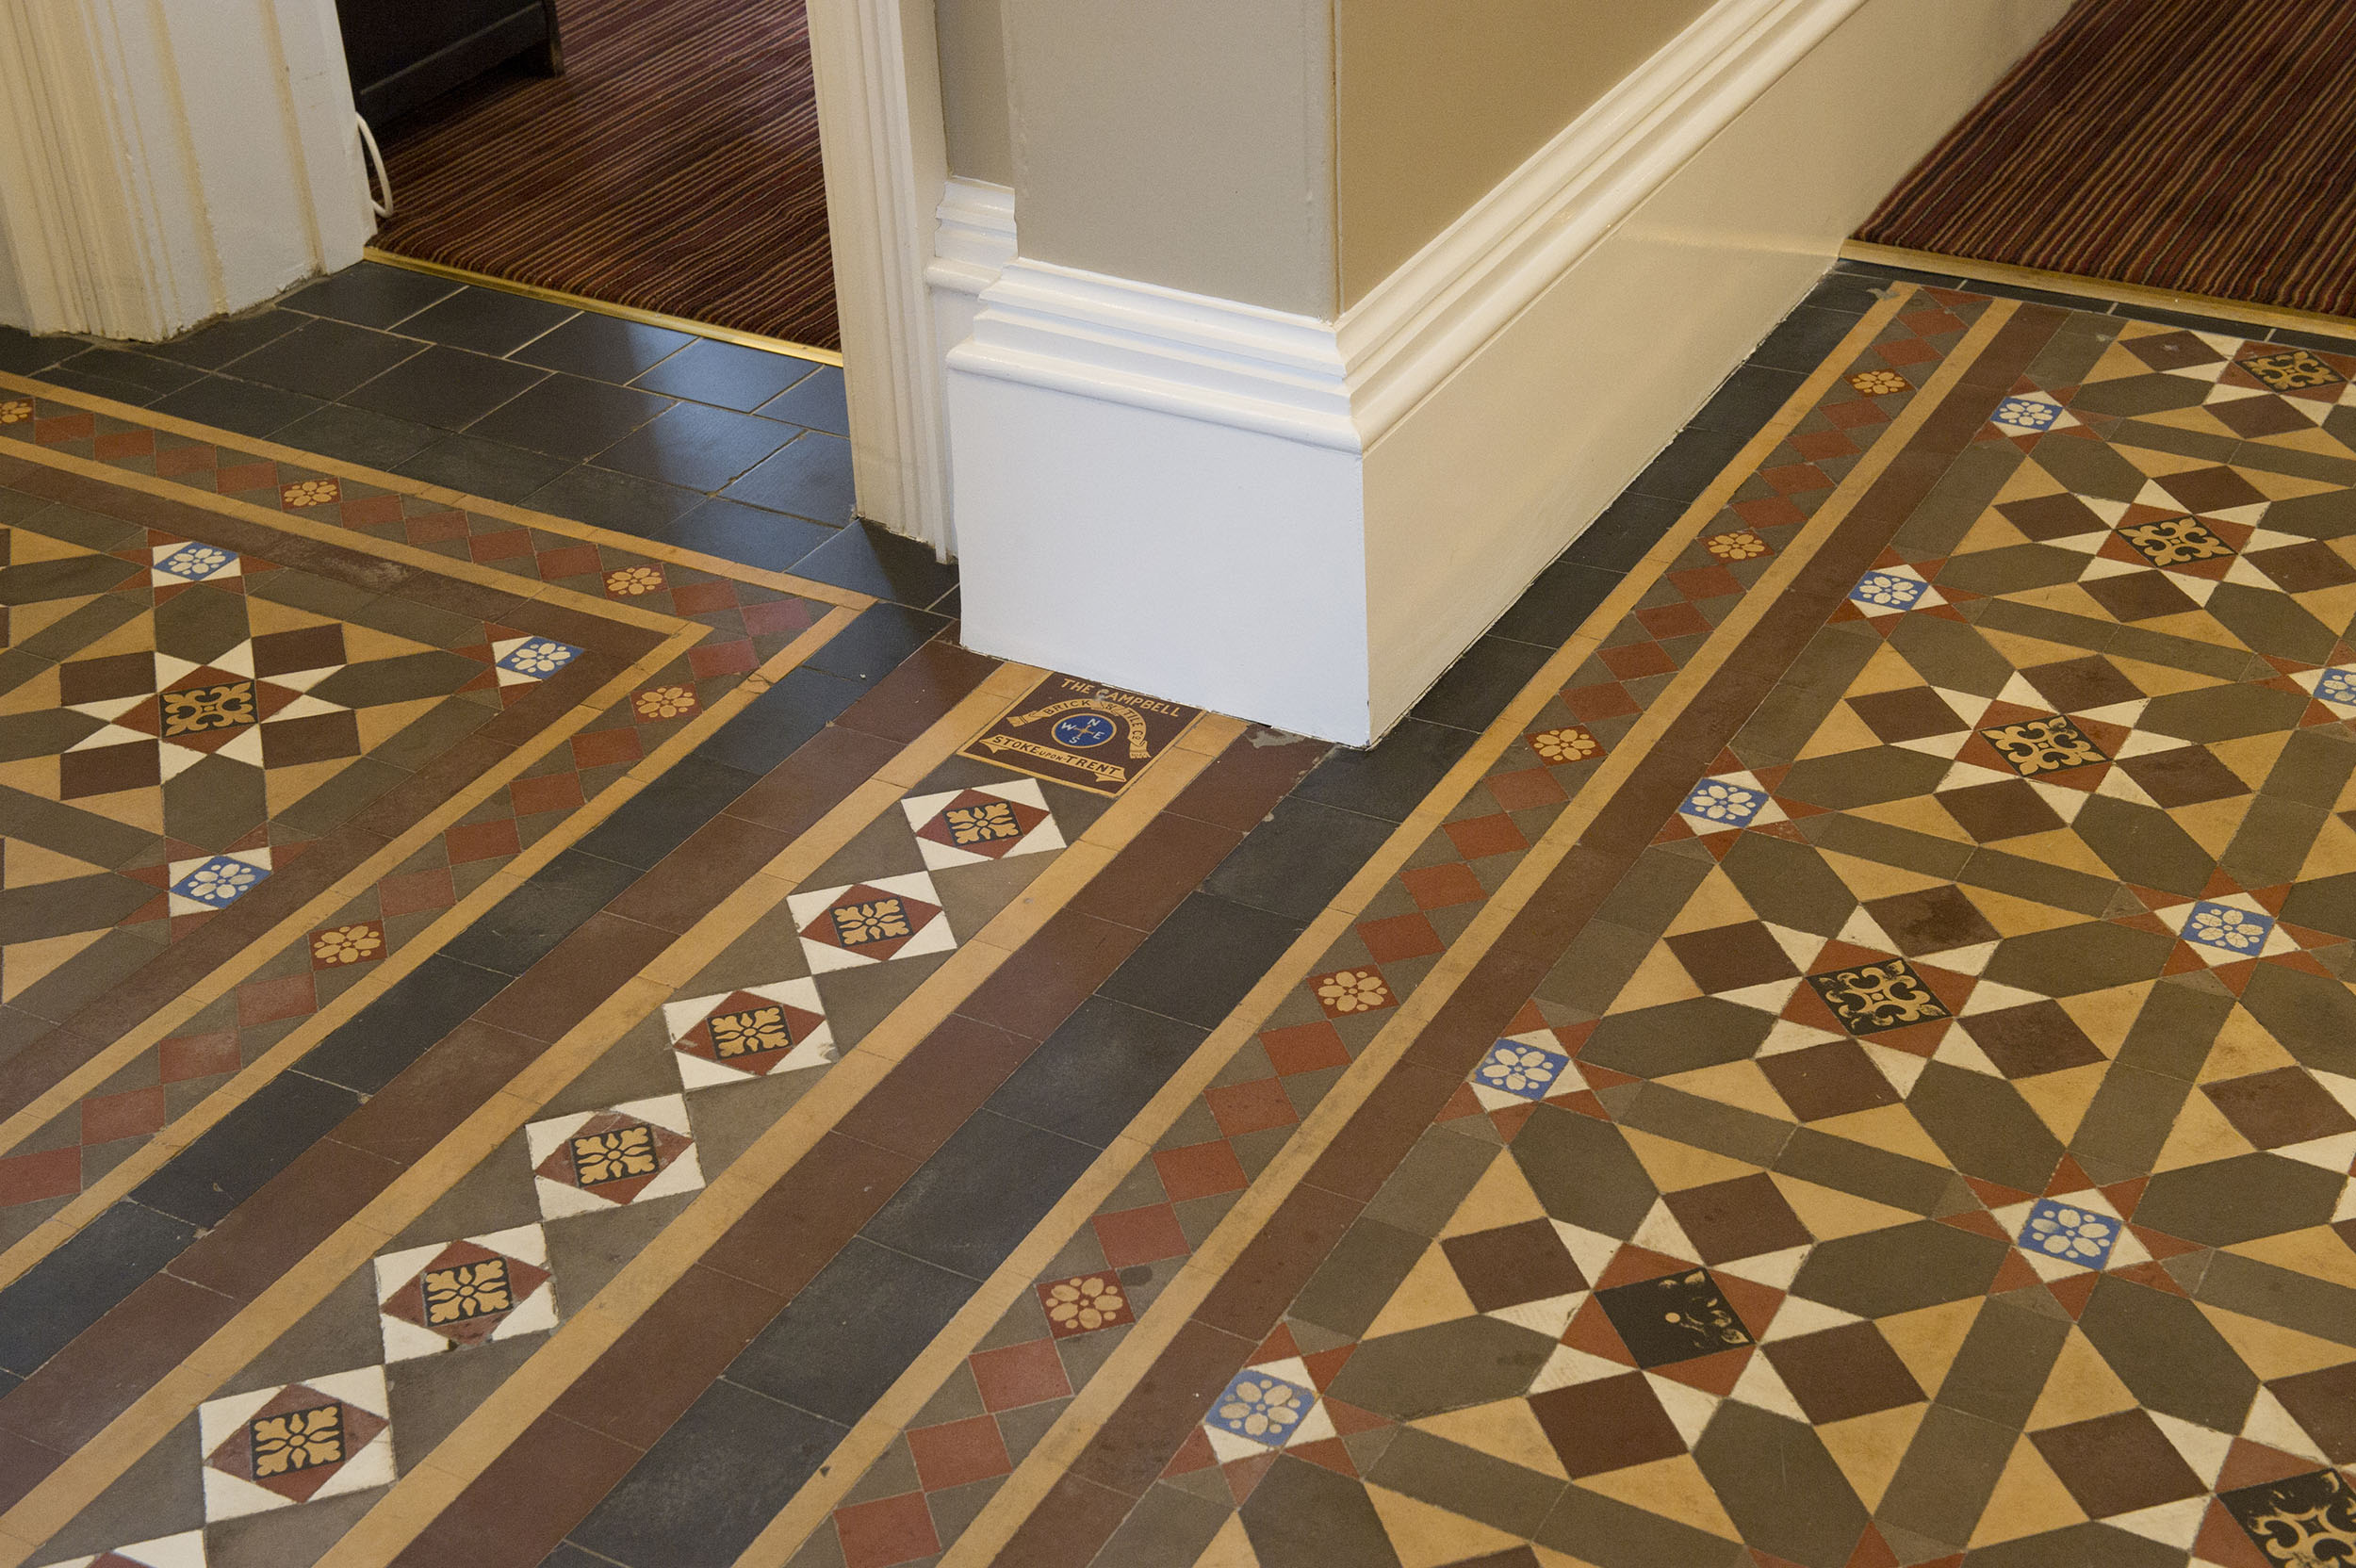 Image of historic floor tiles set out in an intricate pattern.